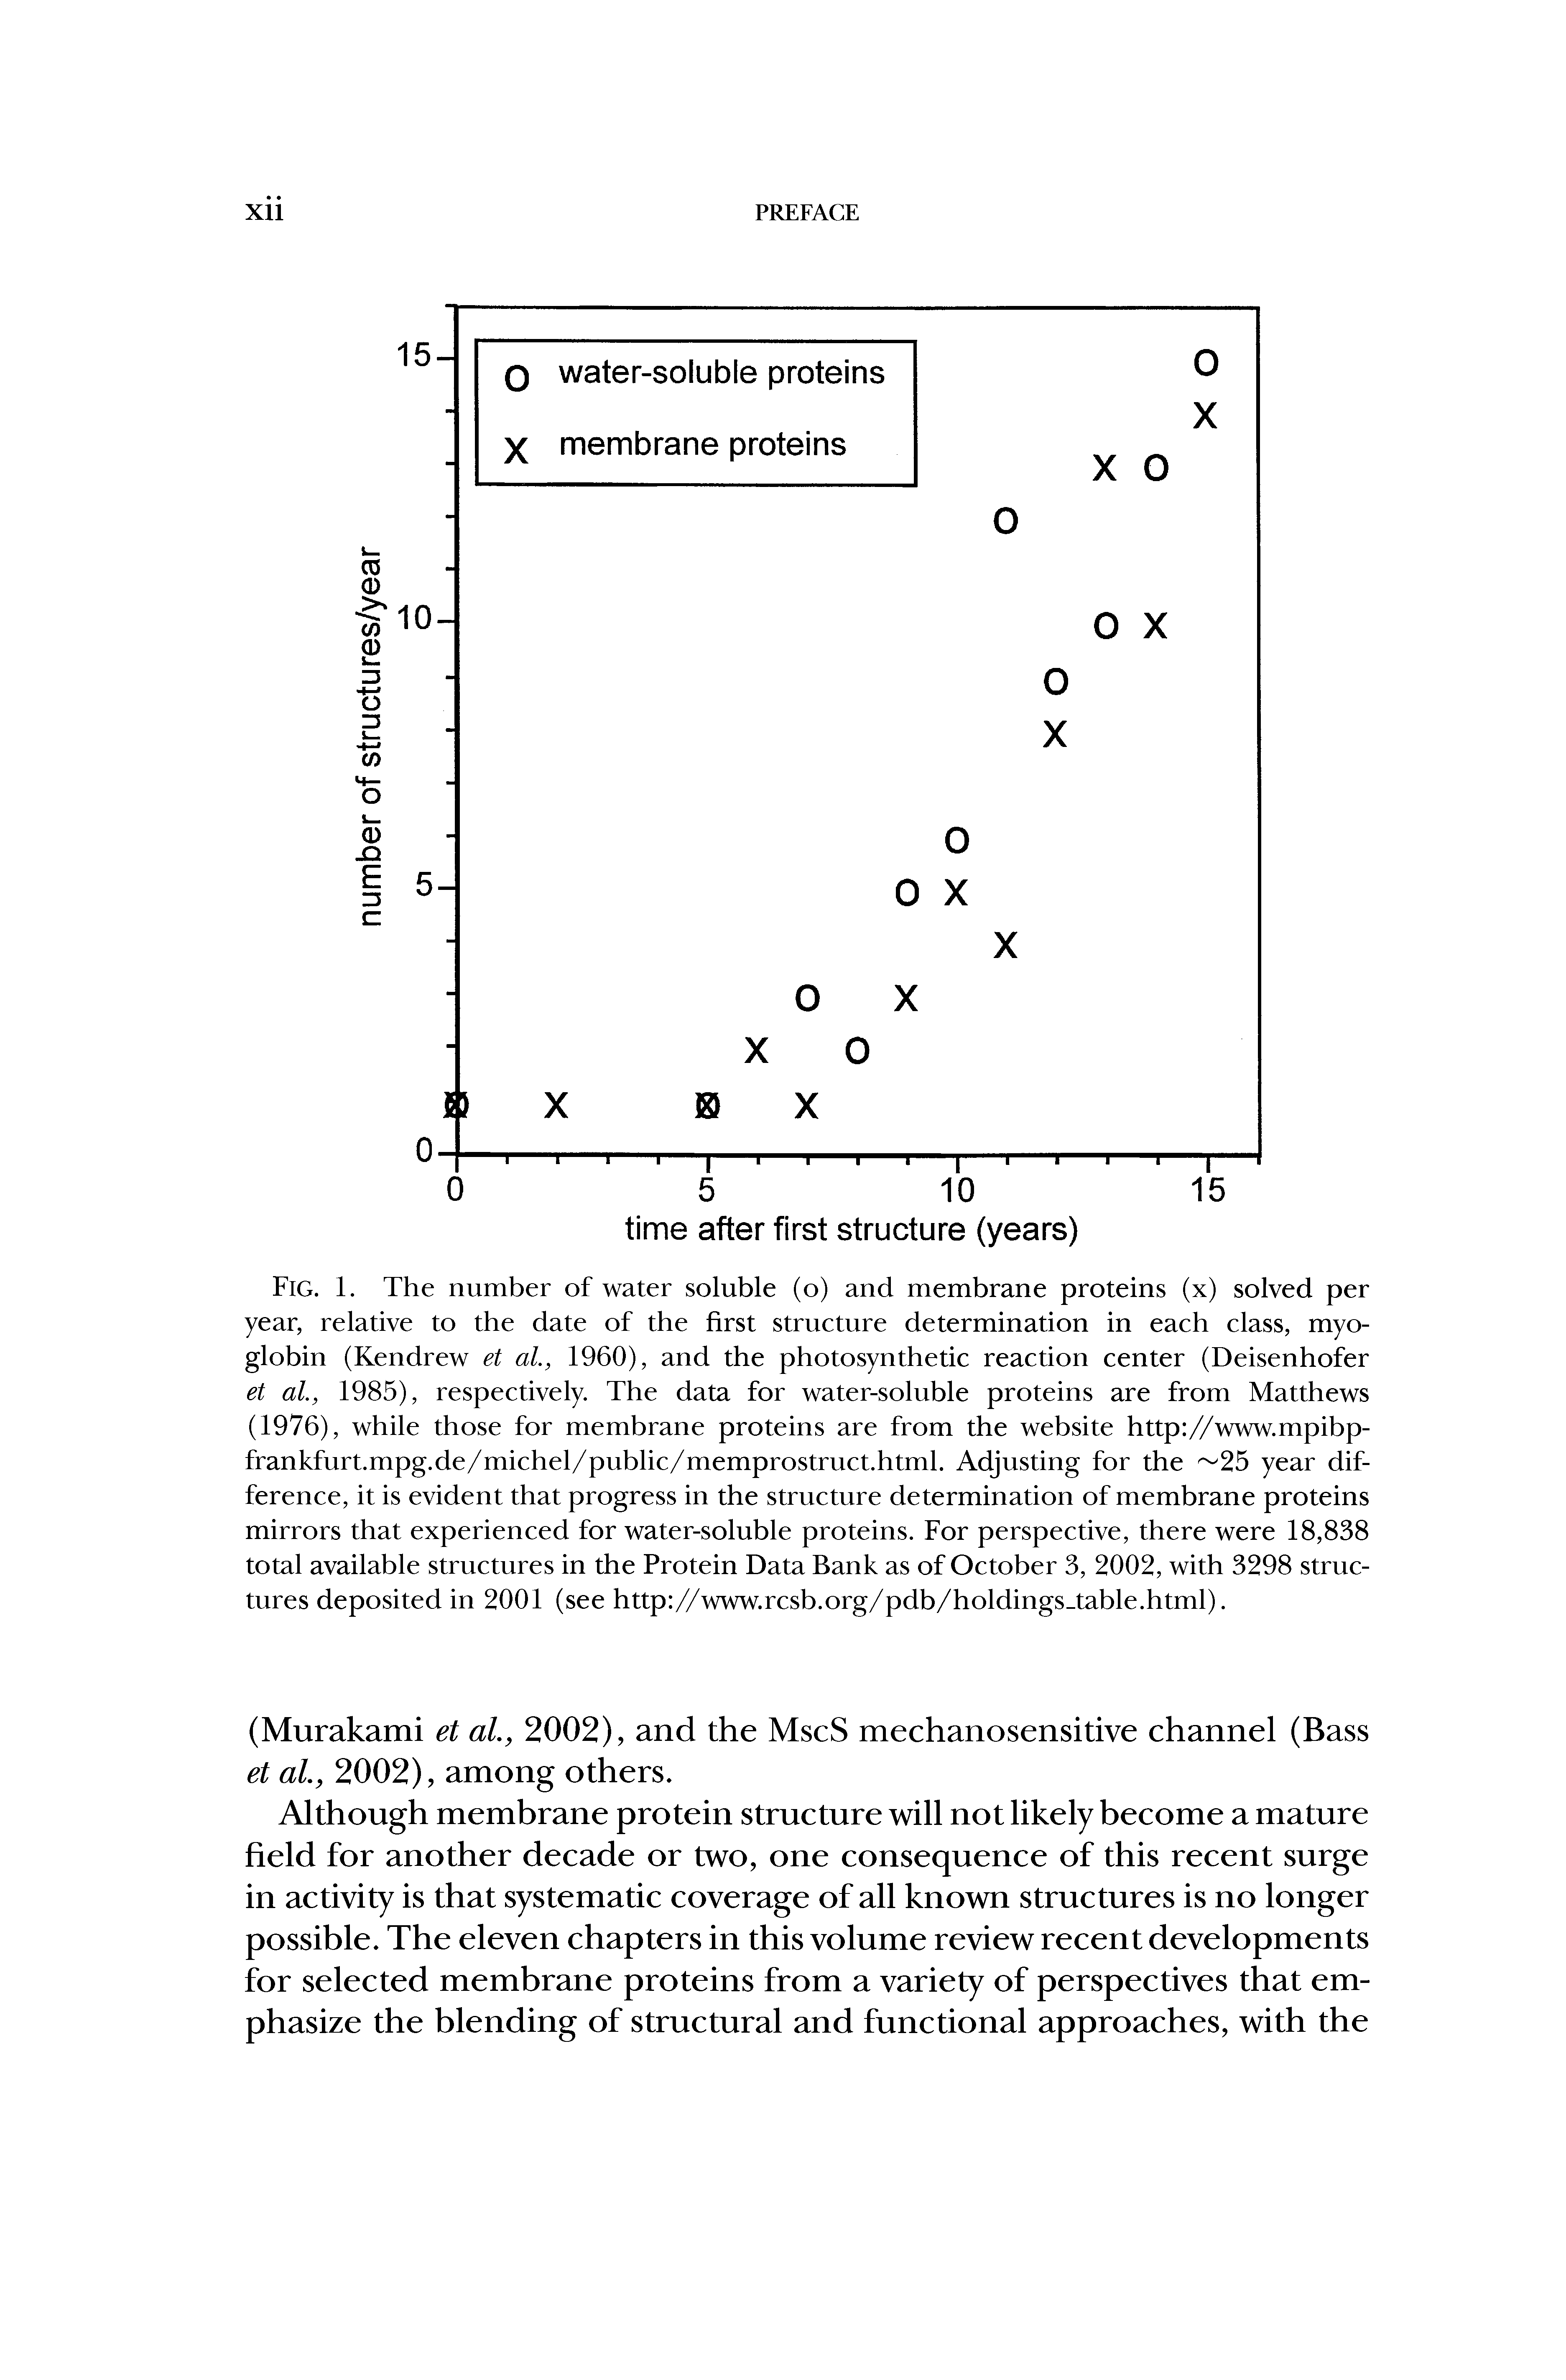 Fig. 1. The number of water soluble (o) and membrane proteins (x) solved per year, relative to the date of the first structure determination in each class, myoglobin (Kendrew et al., 1960), and the photosynthetic reaction center (Deisenhofer et al., 1985), respectively. The data for water-soluble proteins are from Matthews (1976), while those for membrane proteins are from the website http //www.mpibp-frankfurt.mpg.de/michel/public/memprostruct.html. Adjusting for the 25 year difference, it is evident that progress in the structure determination of membrane proteins mirrors that experienced for water-soluble proteins. For perspective, there were 18,838 total available structures in the Protein Data Bank as of October 3, 2002, with 3298 structures deposited in 2001 (see http //www.rcsb.org/pdb/holdings table.html).